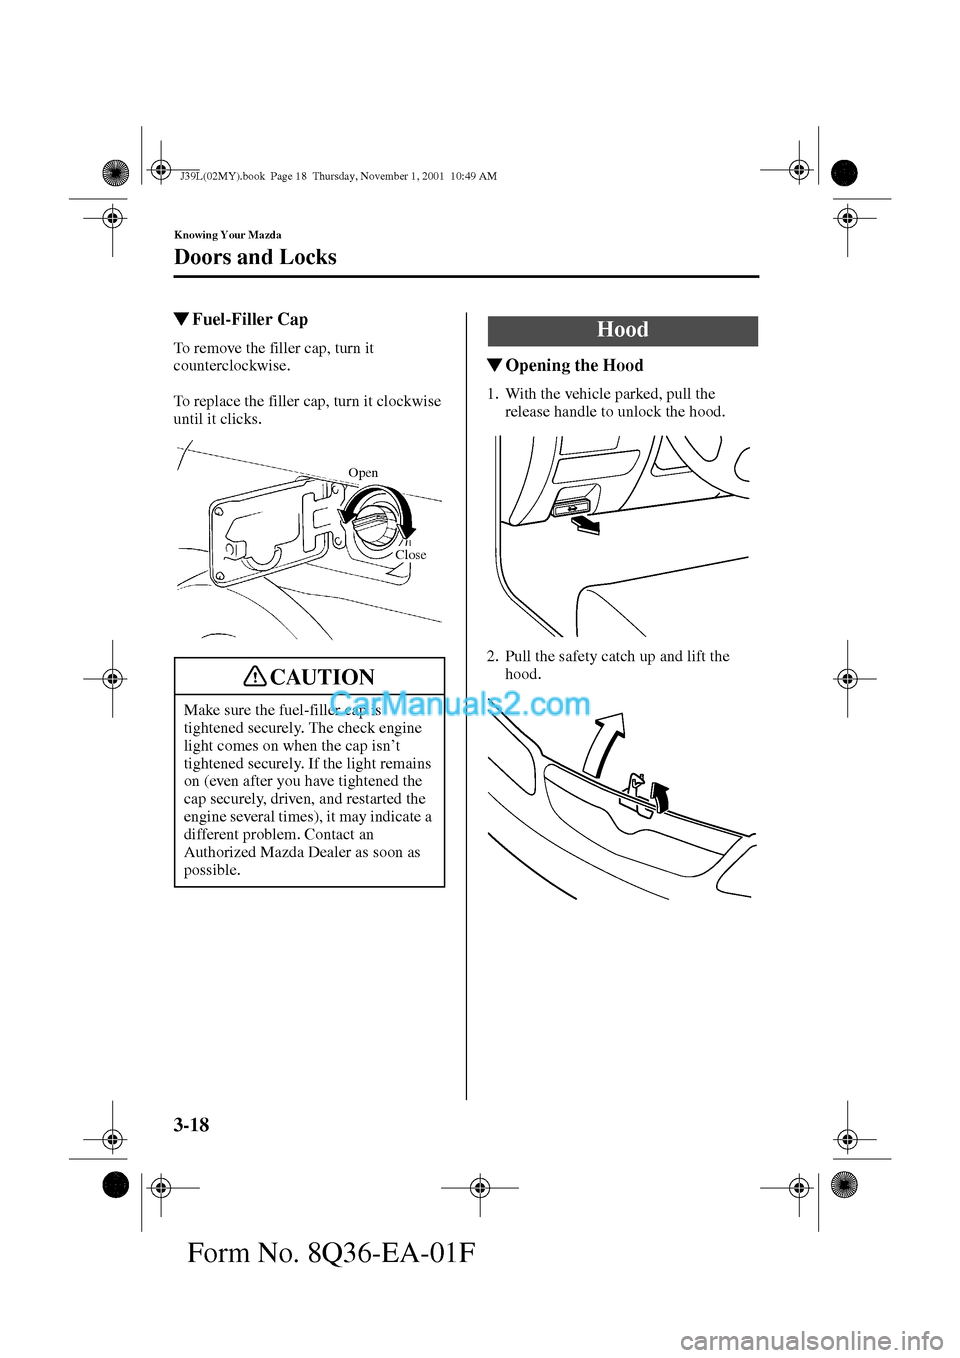 MAZDA MODEL PROTÉGÉ 2002  Owners Manual (in English) 3-18
Knowing Your Mazda
Doors and Locks
Form No. 8Q36-EA-01F
Fuel-Filler Cap
To remove the filler cap, turn it 
counterclockwise.
To replace the filler cap, turn it clockwise 
until it clicks.
Openi